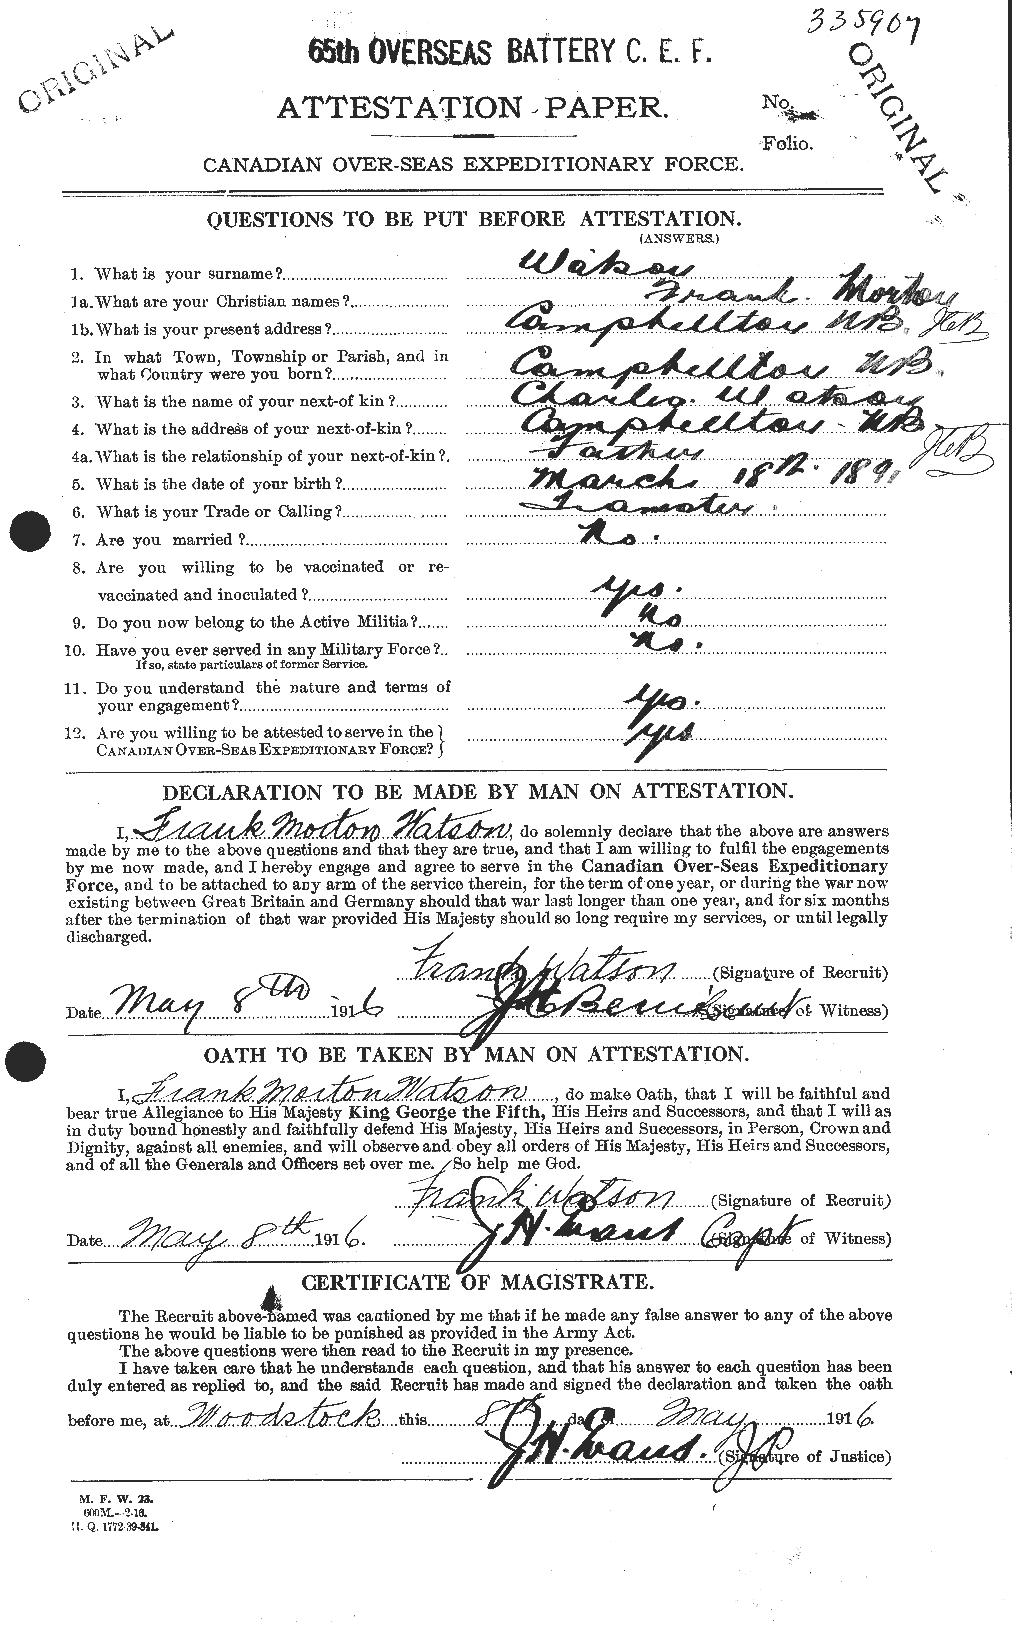 Personnel Records of the First World War - CEF 656707a